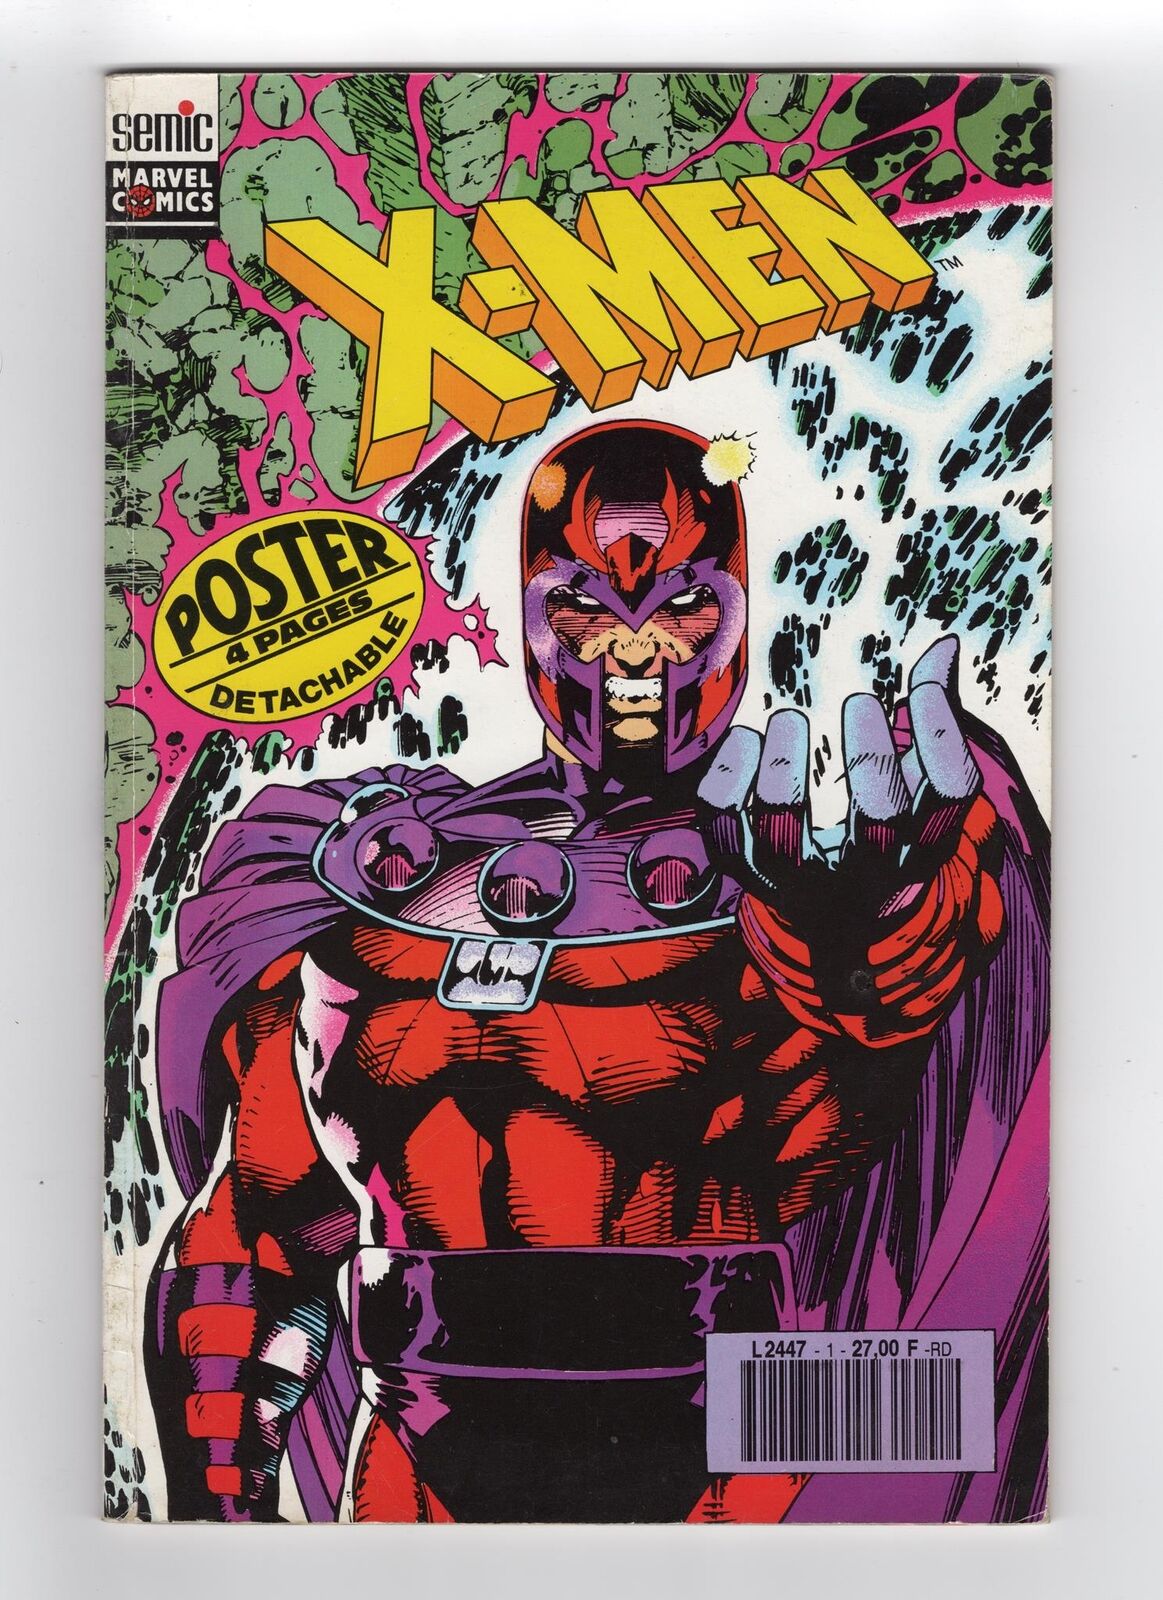 1991 MARVEL X-MEN #1 1ST APP OF ACOLYTES KEY COMPLETE WITH POSTER RARE FRANCE